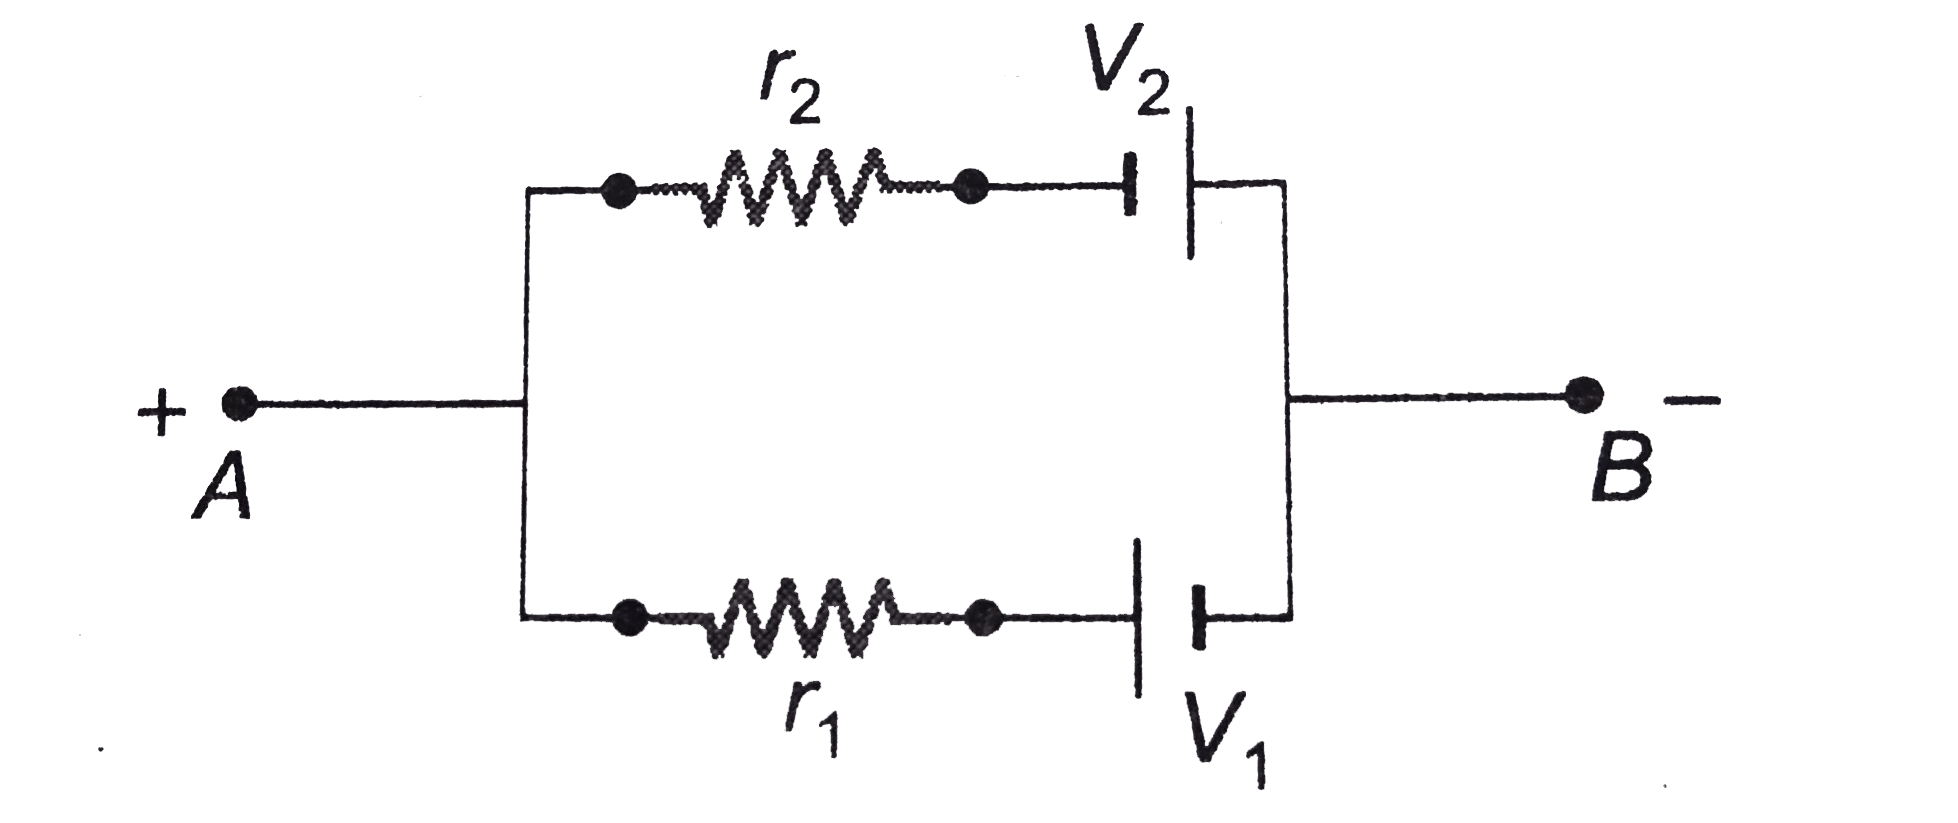 Find the emf (V) and internal resistance (R) of a single battery which is equivalent toa parallel combination of two batteries of emf V1 and V2 and internal resistances r1 and r2 respectively, with polrities as shown in figure